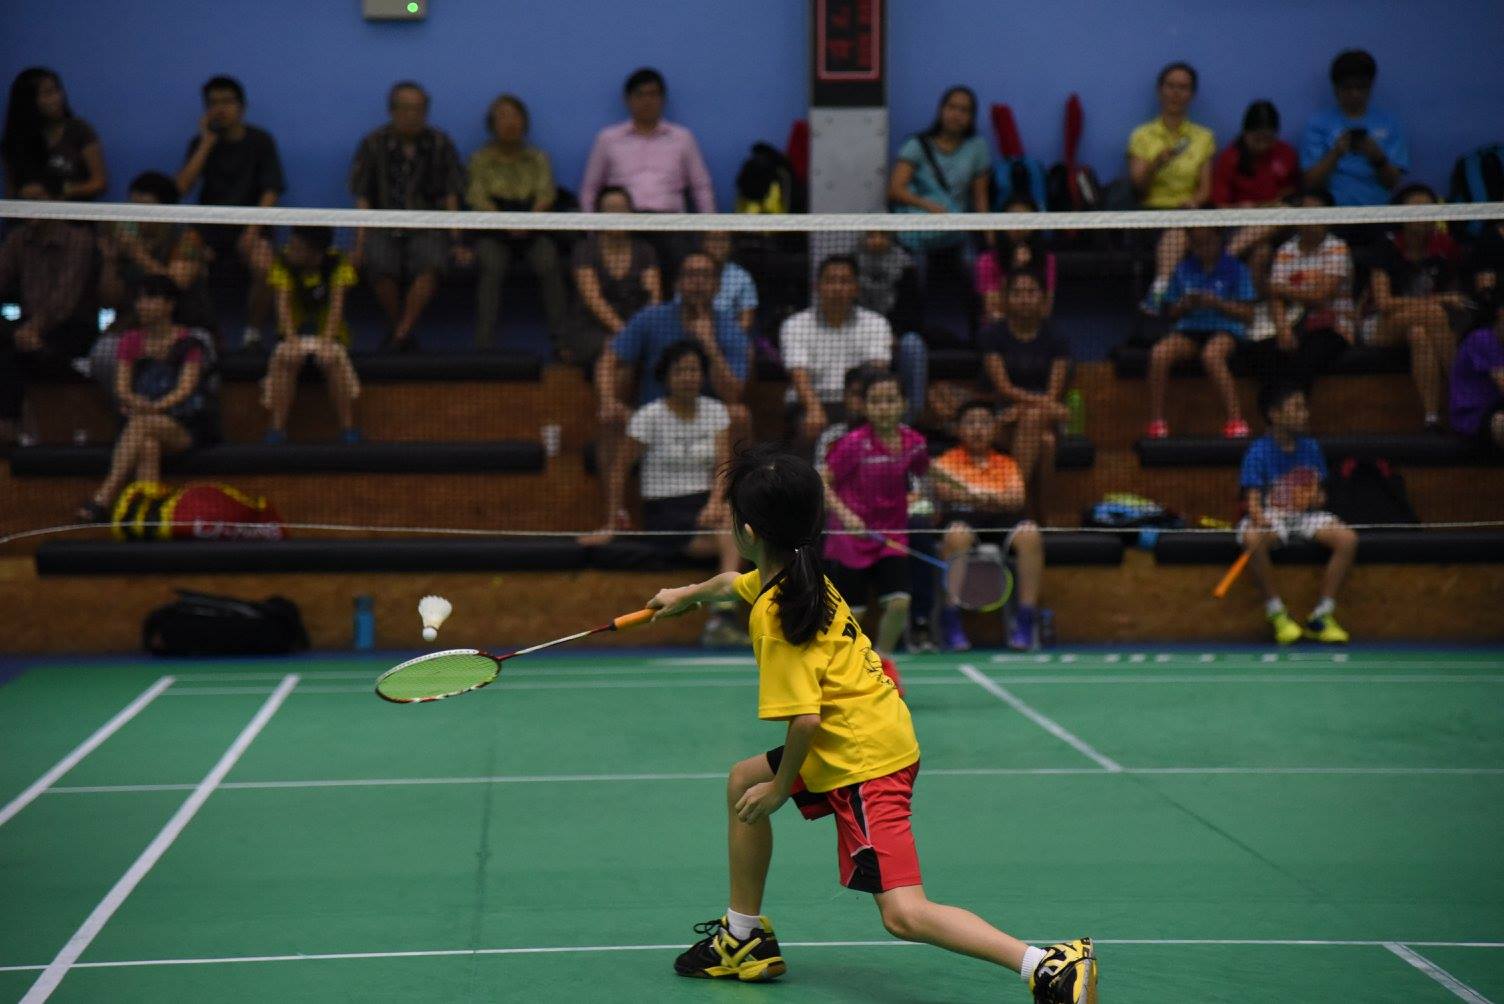 Badminton is suitable for all ages, including children